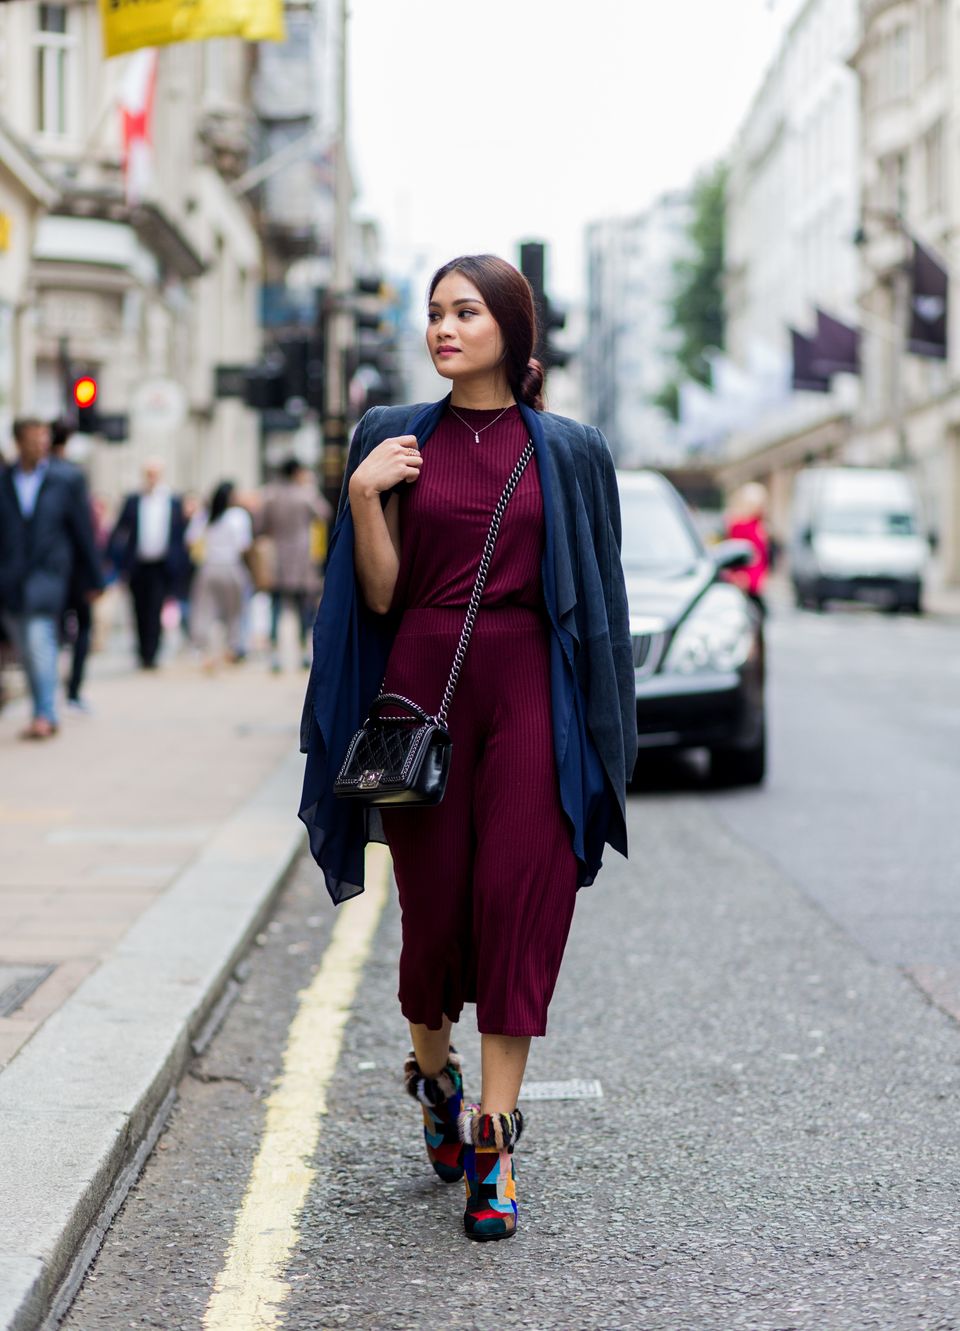 London Fashion Week 2016: Street Style Looks To Make You Swoon ...